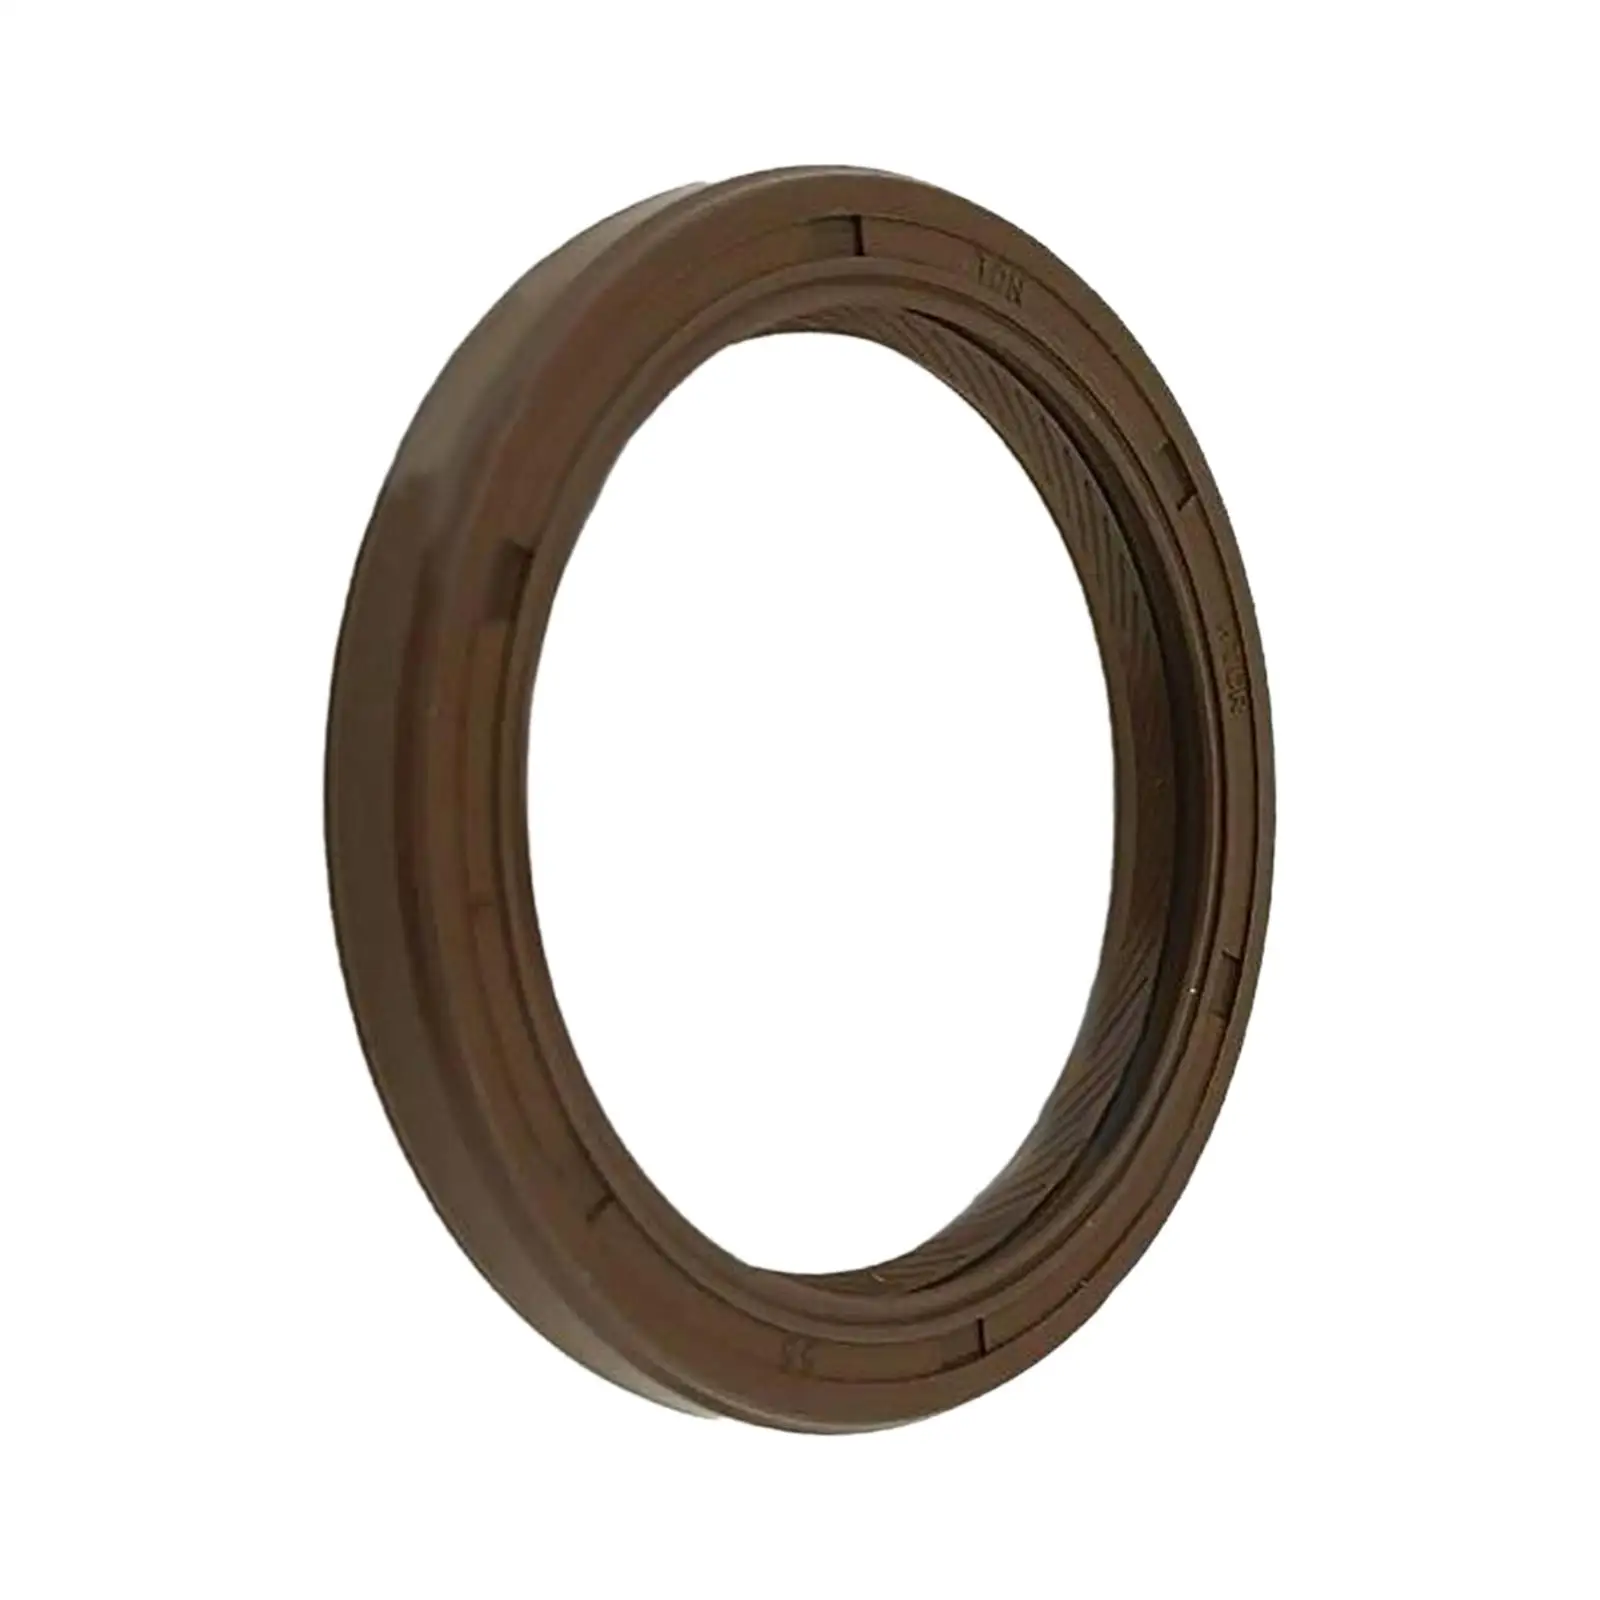 Oil Seal for Yamaha Outboard 25HP 30HP 40HP 50HP 60HP 4 Stroke Easily to Install Boat Engine Parts Professional